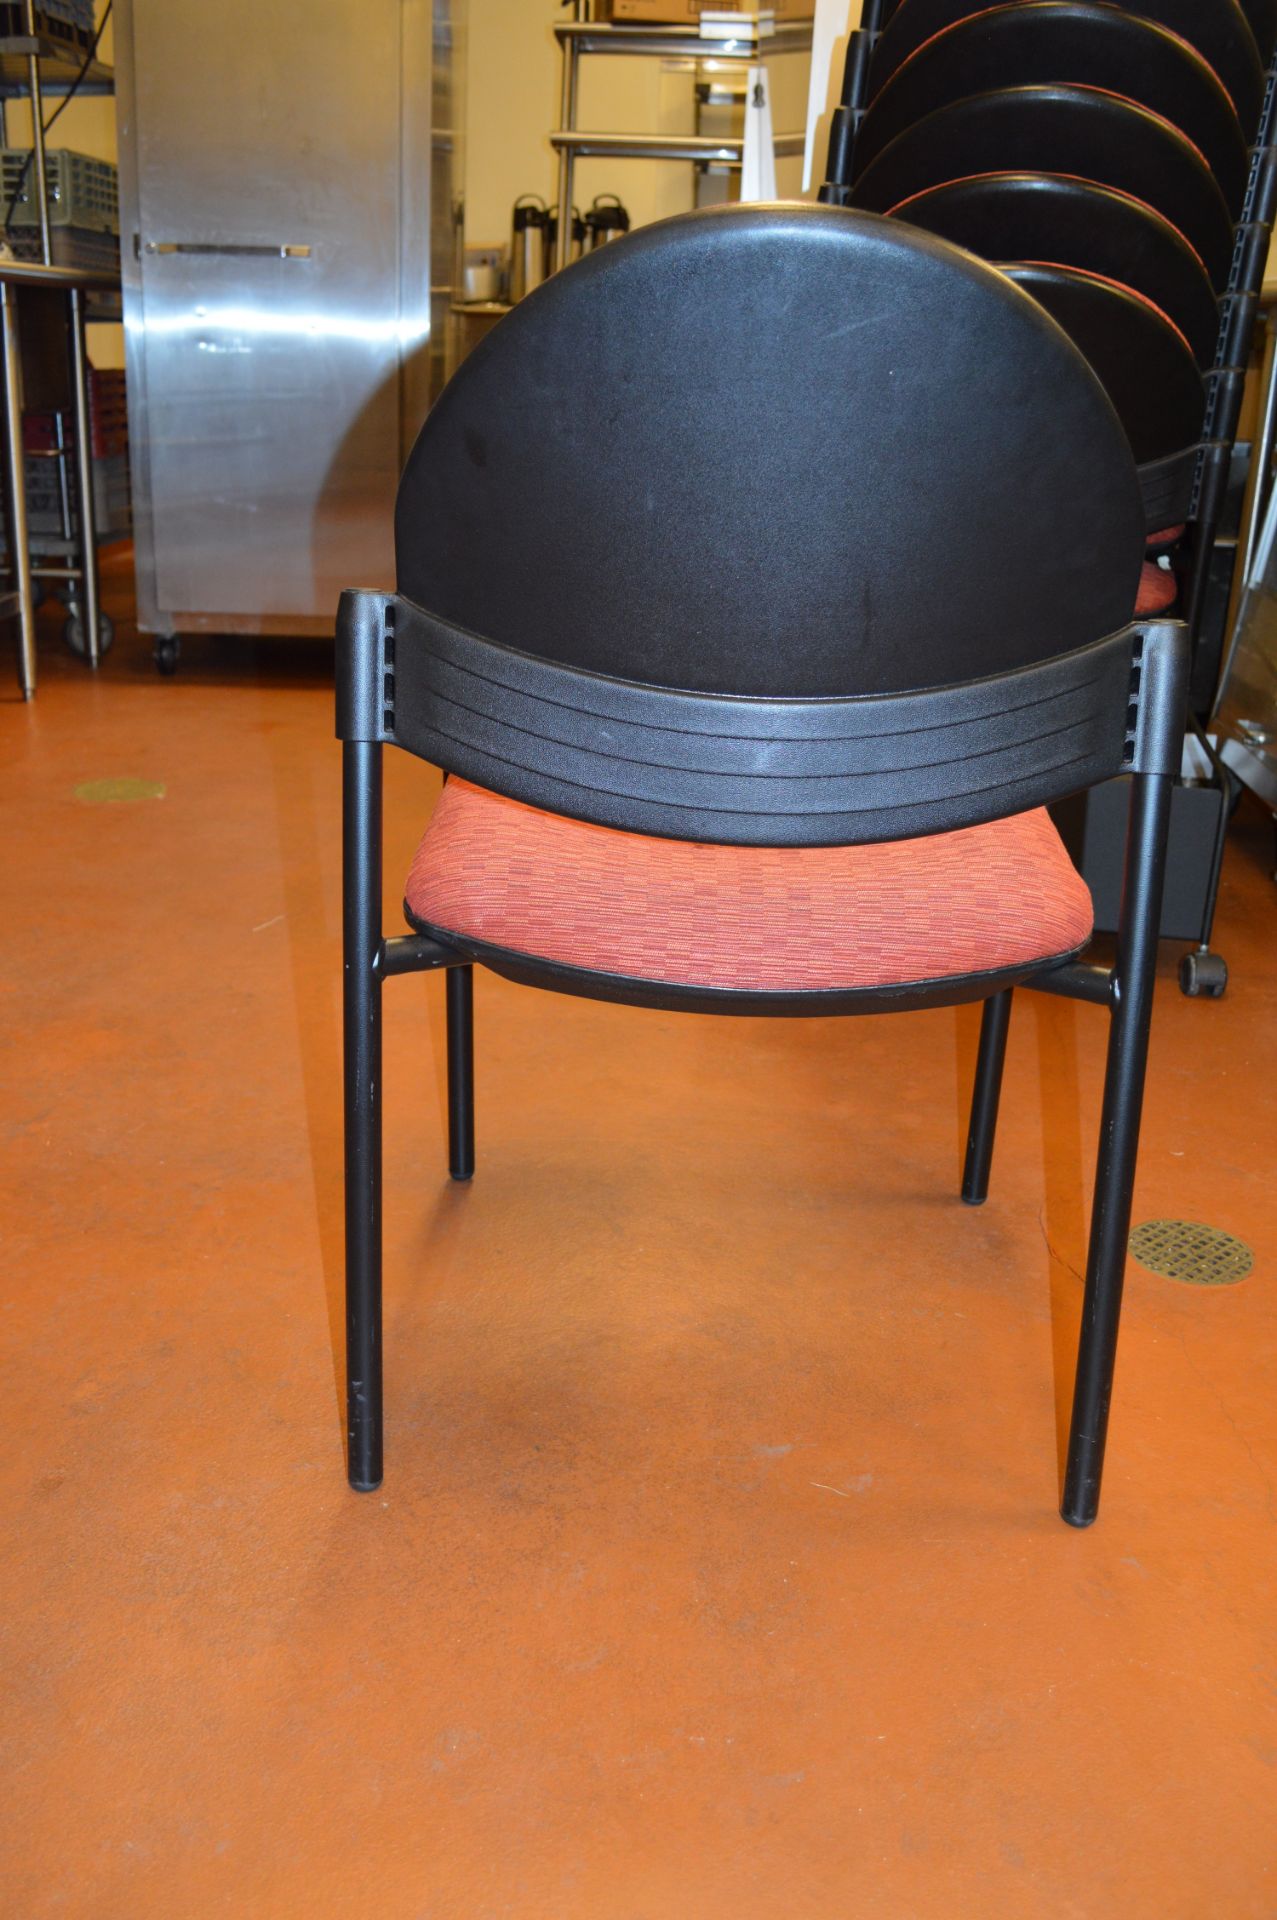 100 STACK CHAIRS PERFECT SHAPE LIGHTLY USED (100 X MONEY) - Image 2 of 5